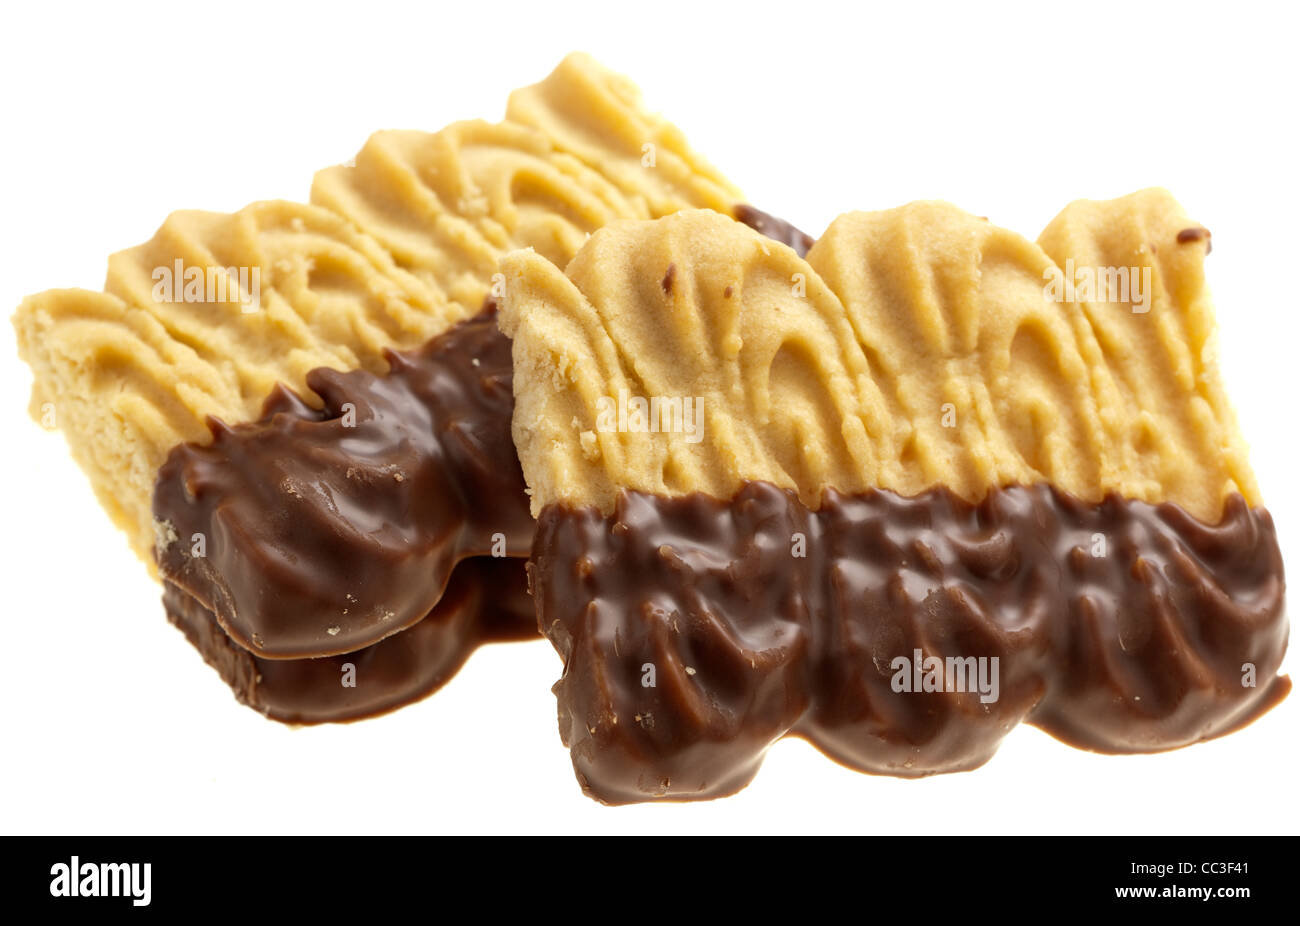 Shortcake biscuits half dipped in chocolate Stock Photo